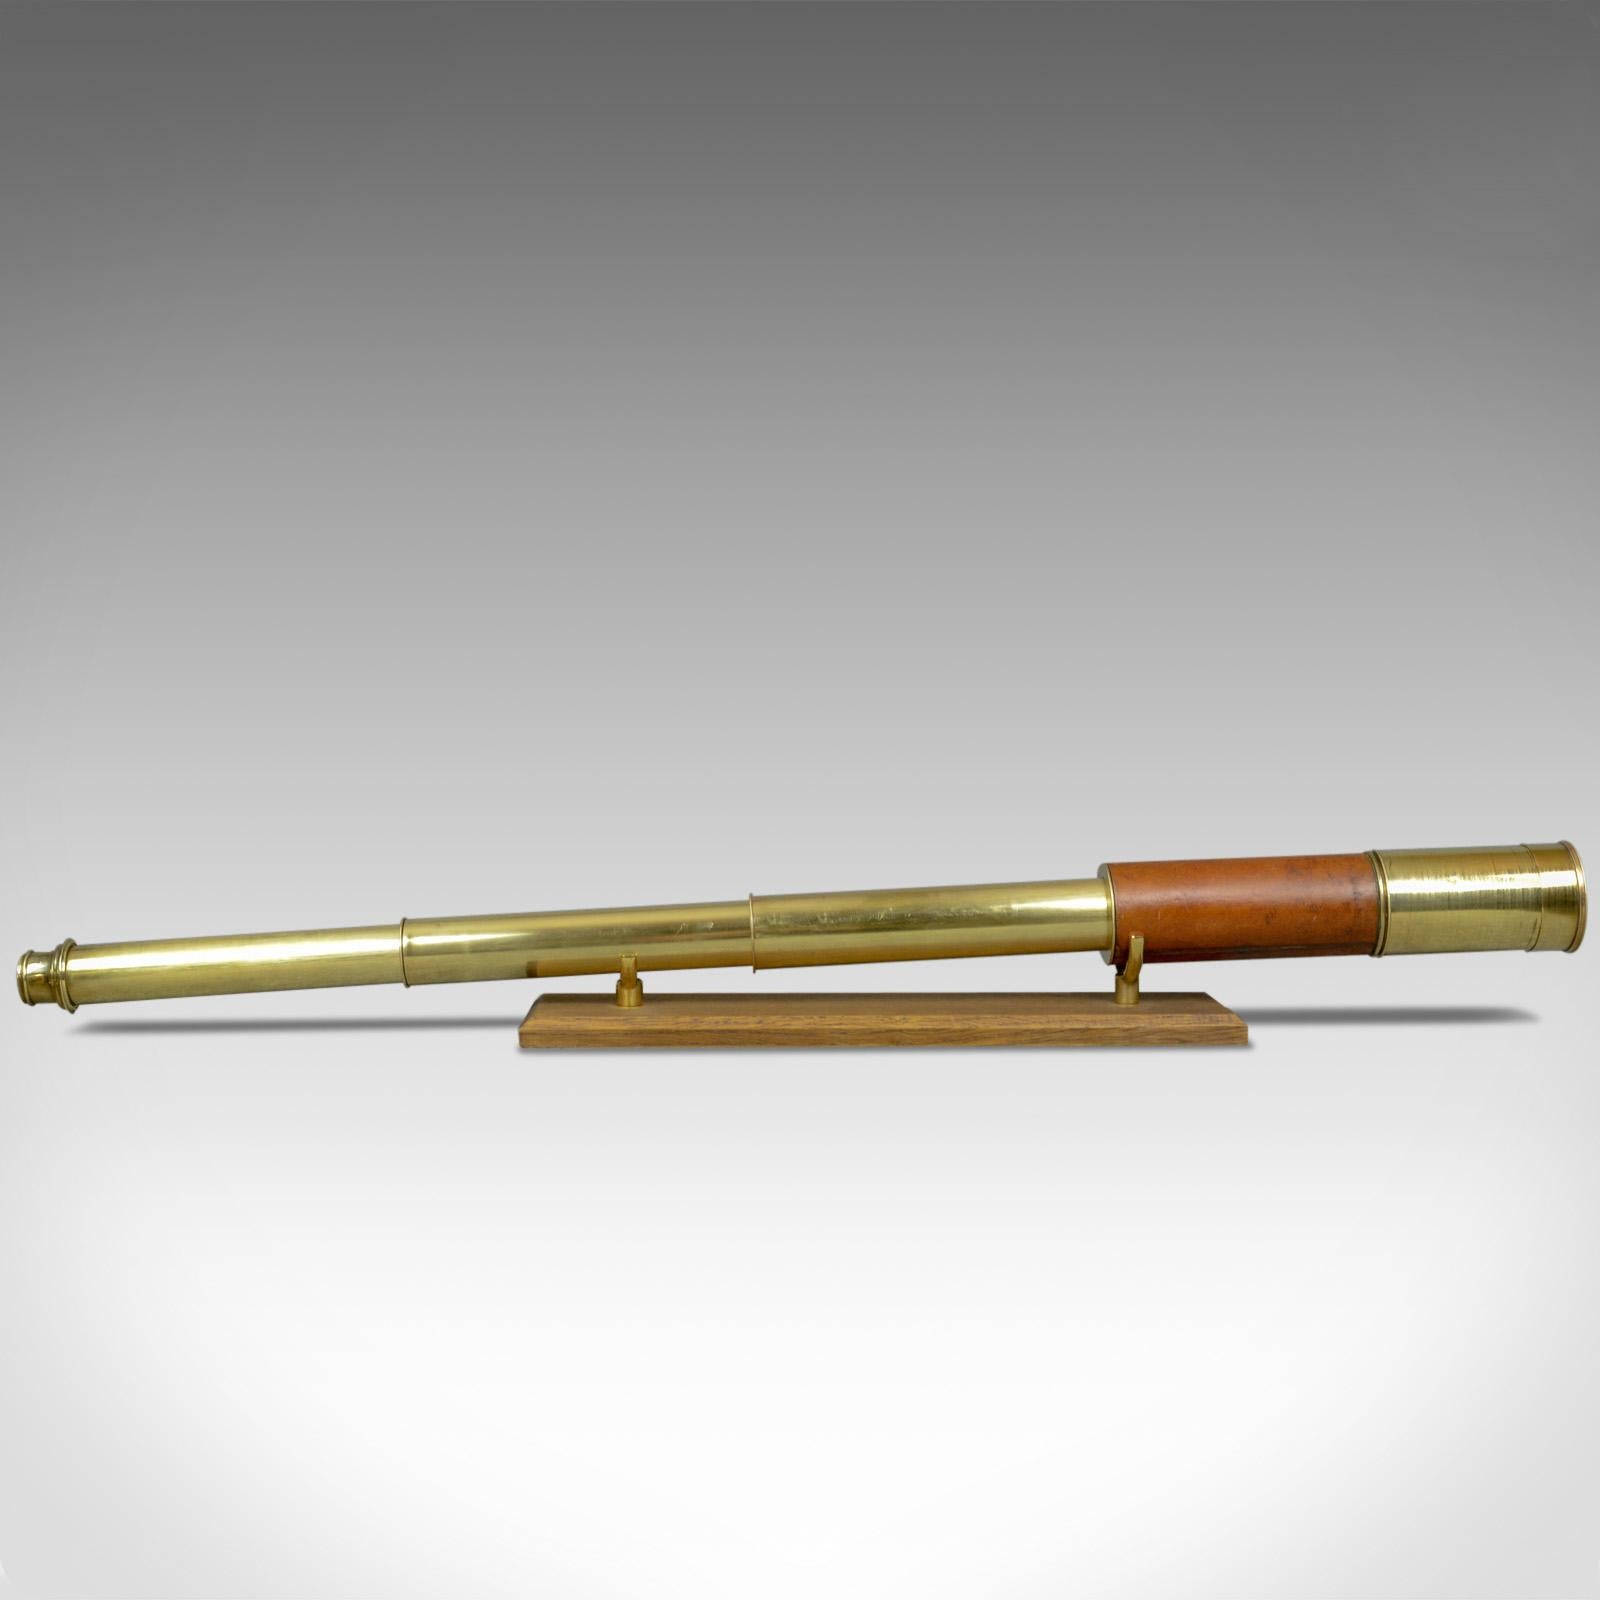 This is an antique telescope, a three draw refractor for terrestrial or astronomical use. An English scope dating to the early 19th century, circa 1820.

Perfect for bird watching, landscape appreciation, wildlife, or maritime observation. Equally